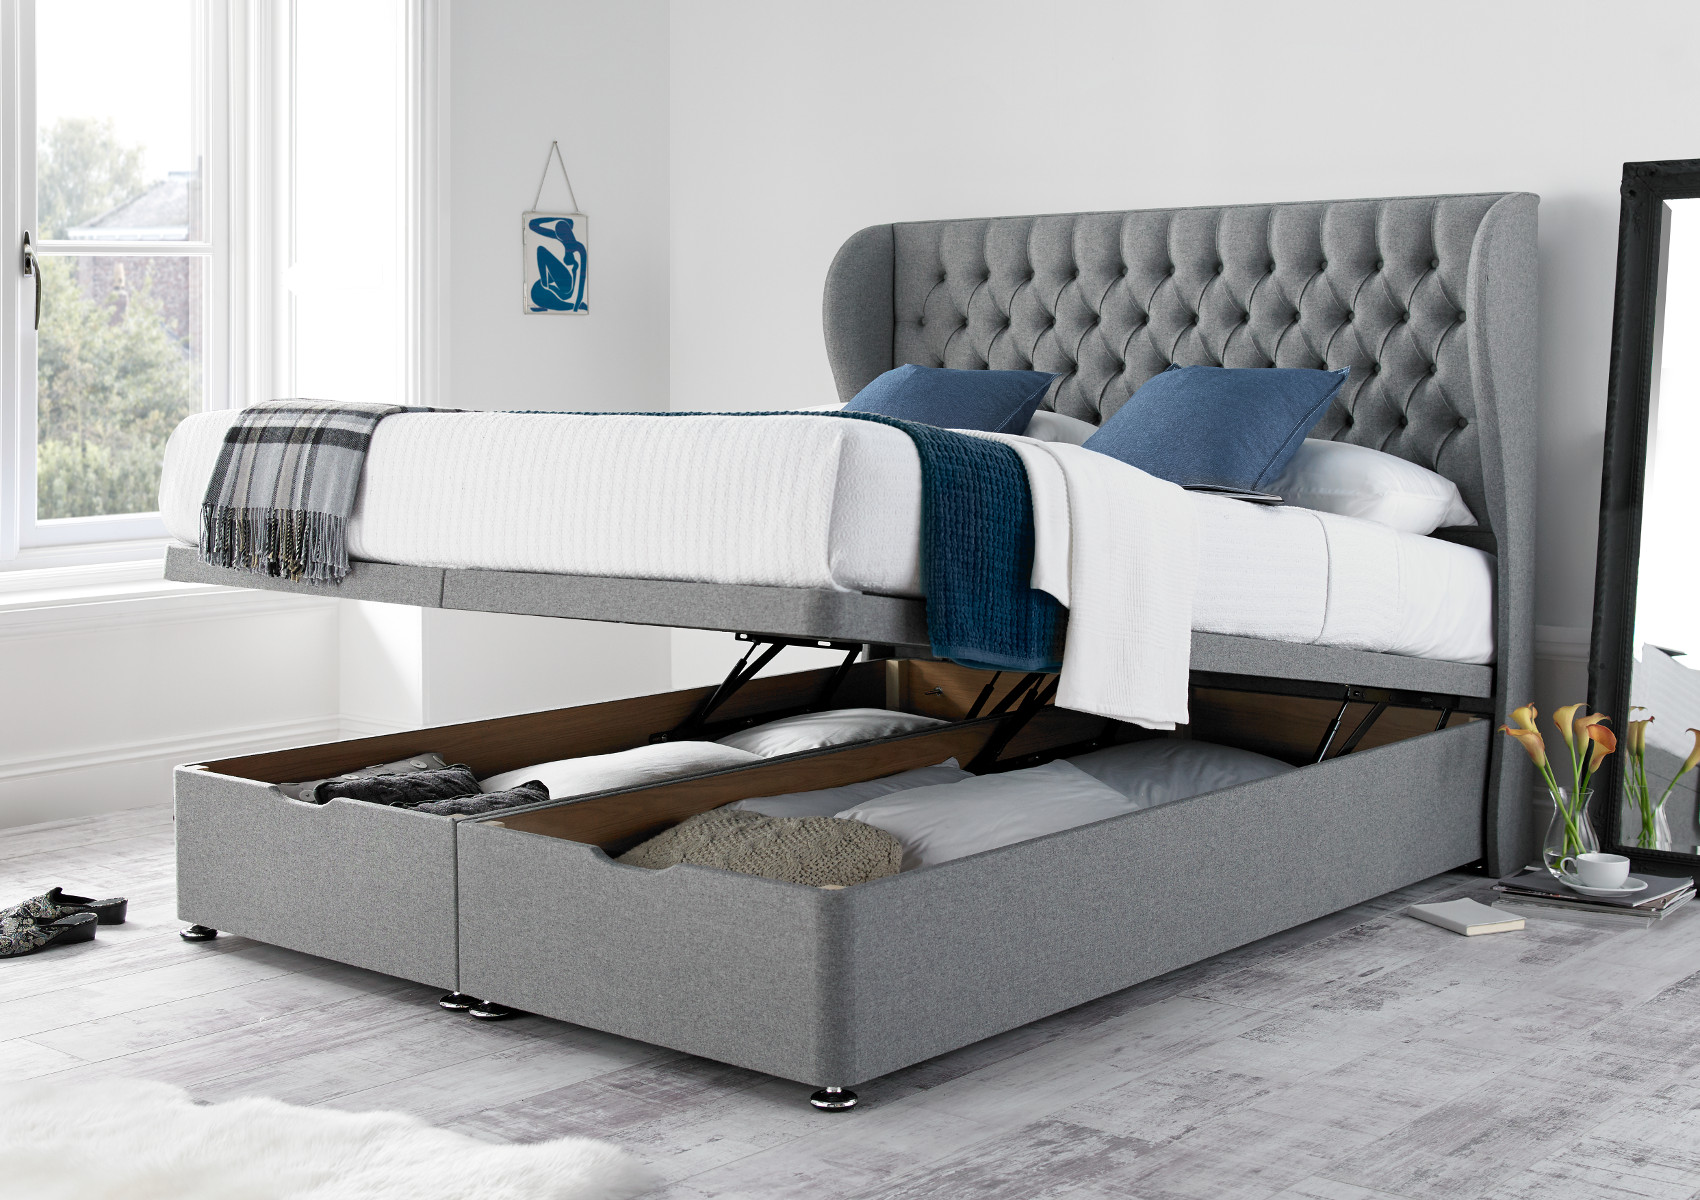 View Chesterfield Naples Silver Upholstered King Size Ottoman Bed Time4Sleep information